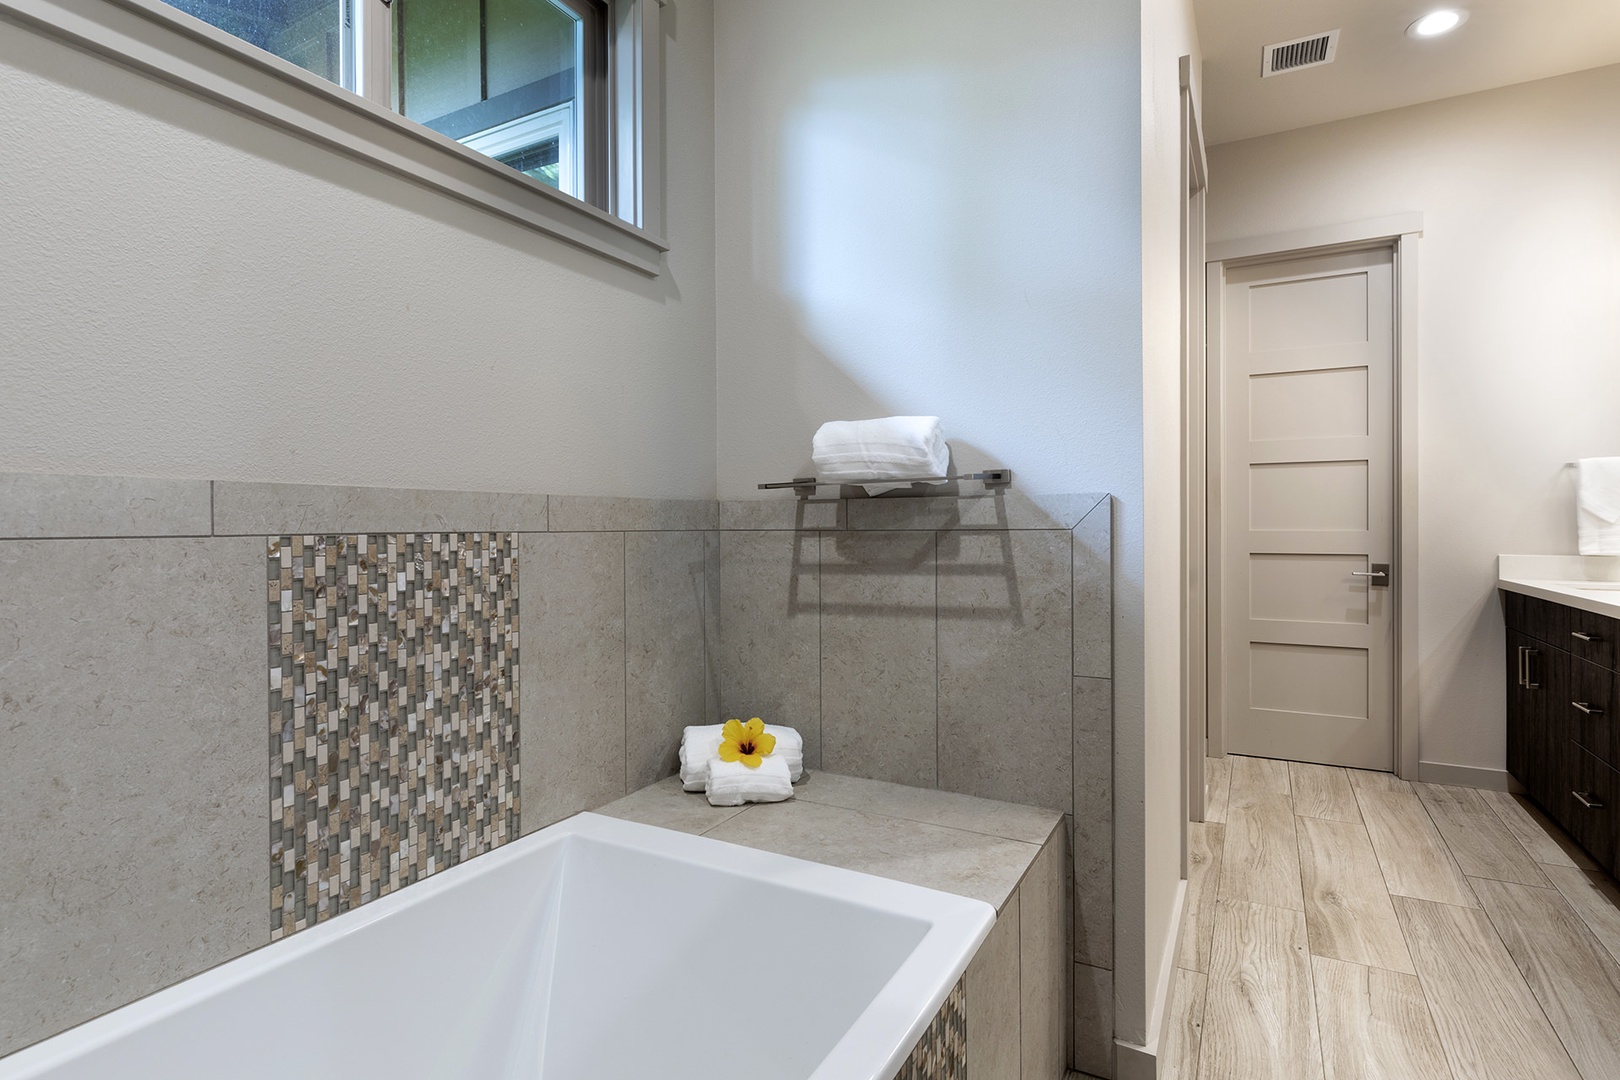 Master ensuite with dual sinks, walk-in shower, and soaking tub